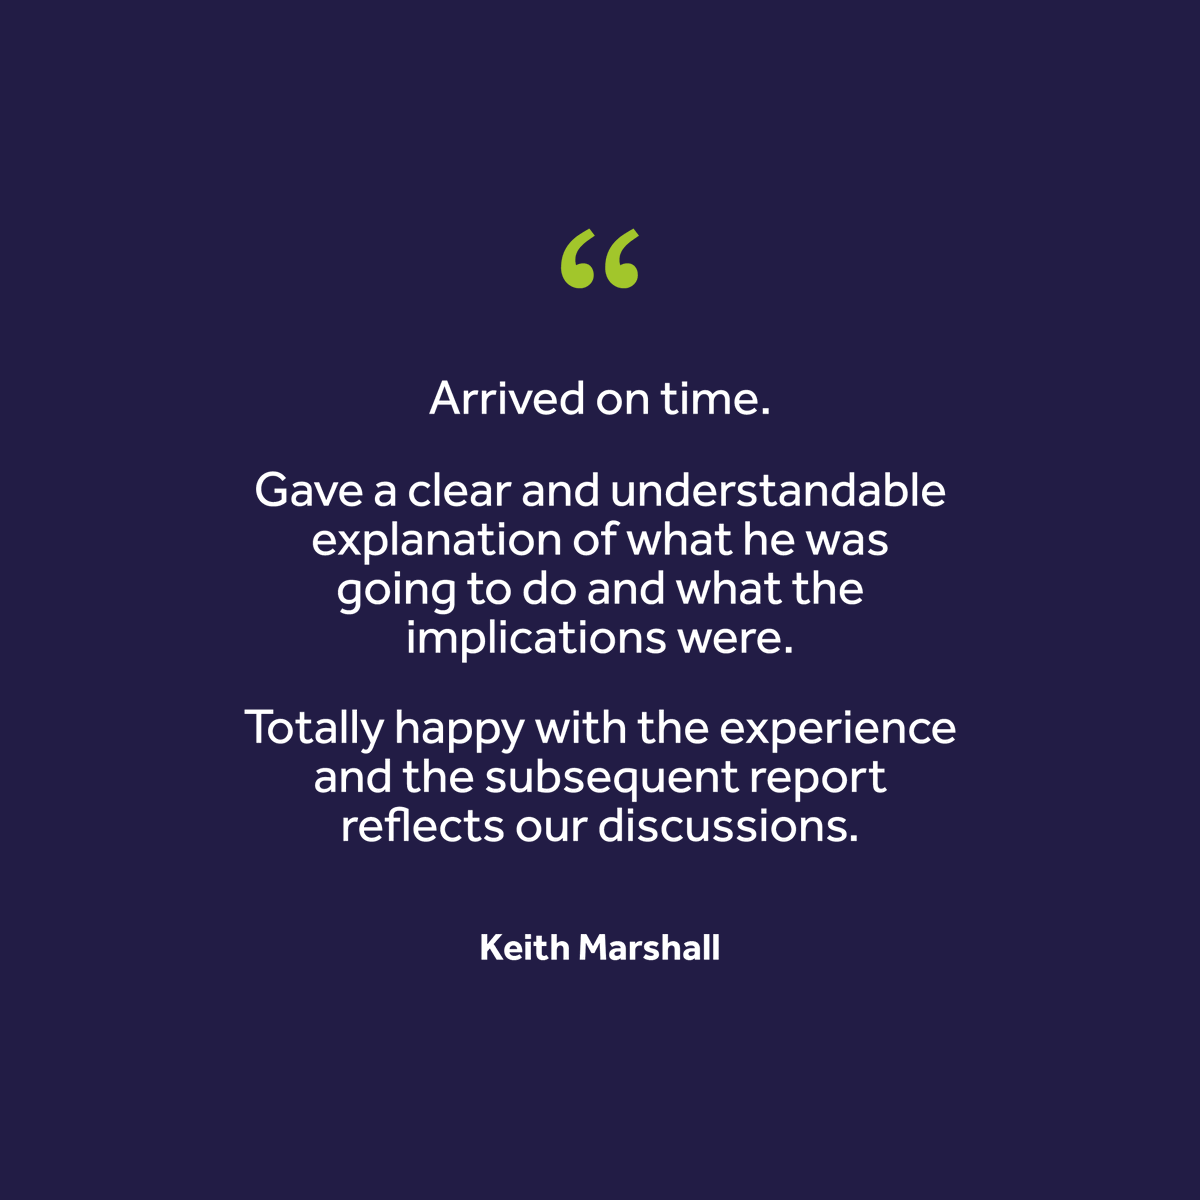 Thank you, Keith, for choosing Vibrant's services!

Reviews like this make our day, we're looking forward to working with you again 🙌

#Review #Experience #ServiceProvider #PropertyPartner #Vibrant